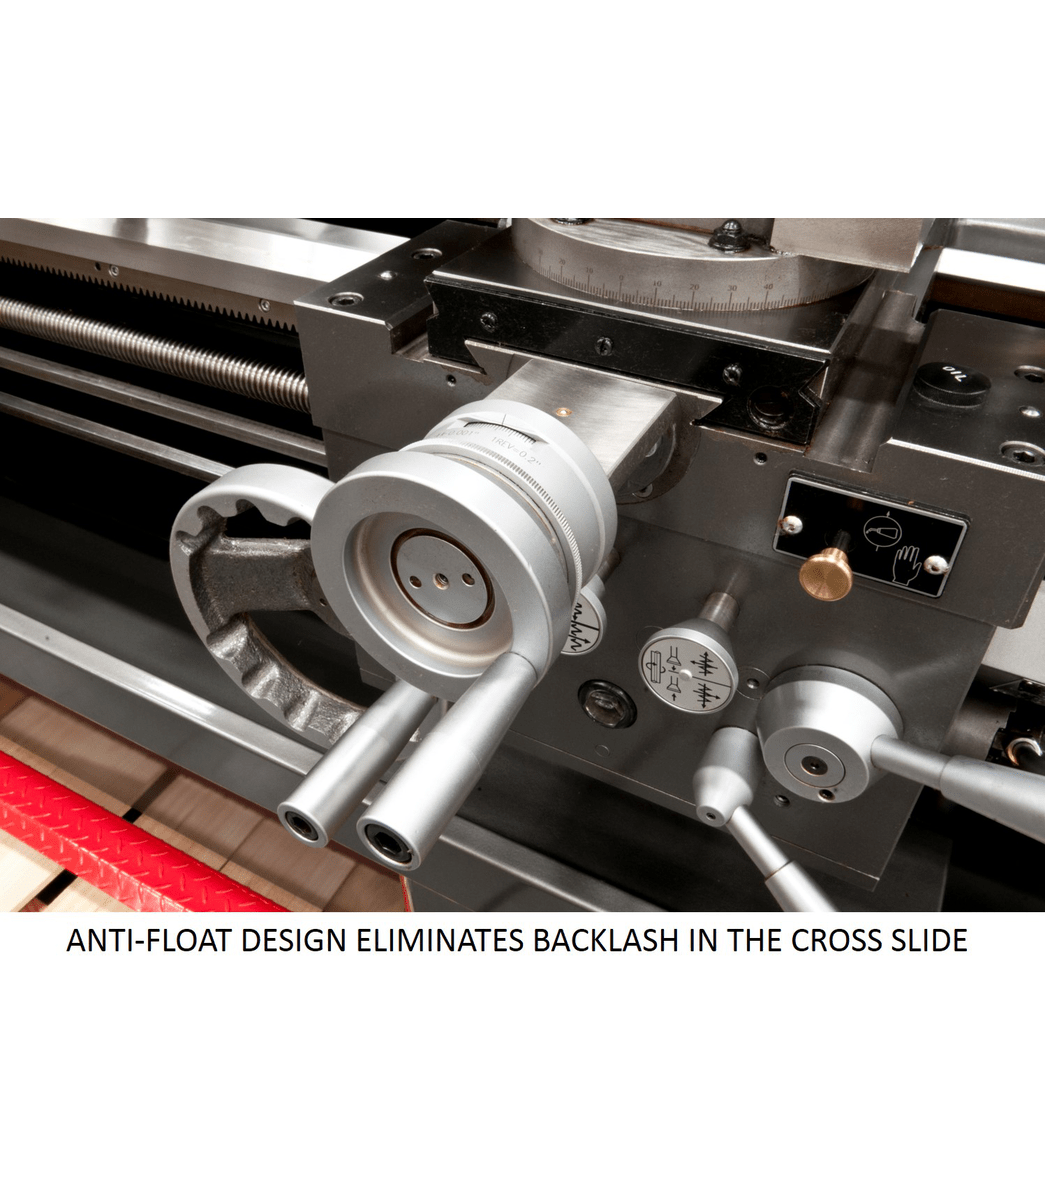 Elite 12" x 36" EVS Lathe With ACU-RITE 303 CSS DRO With Taper Attachment and Collet Closer | E-1236VS - Jet